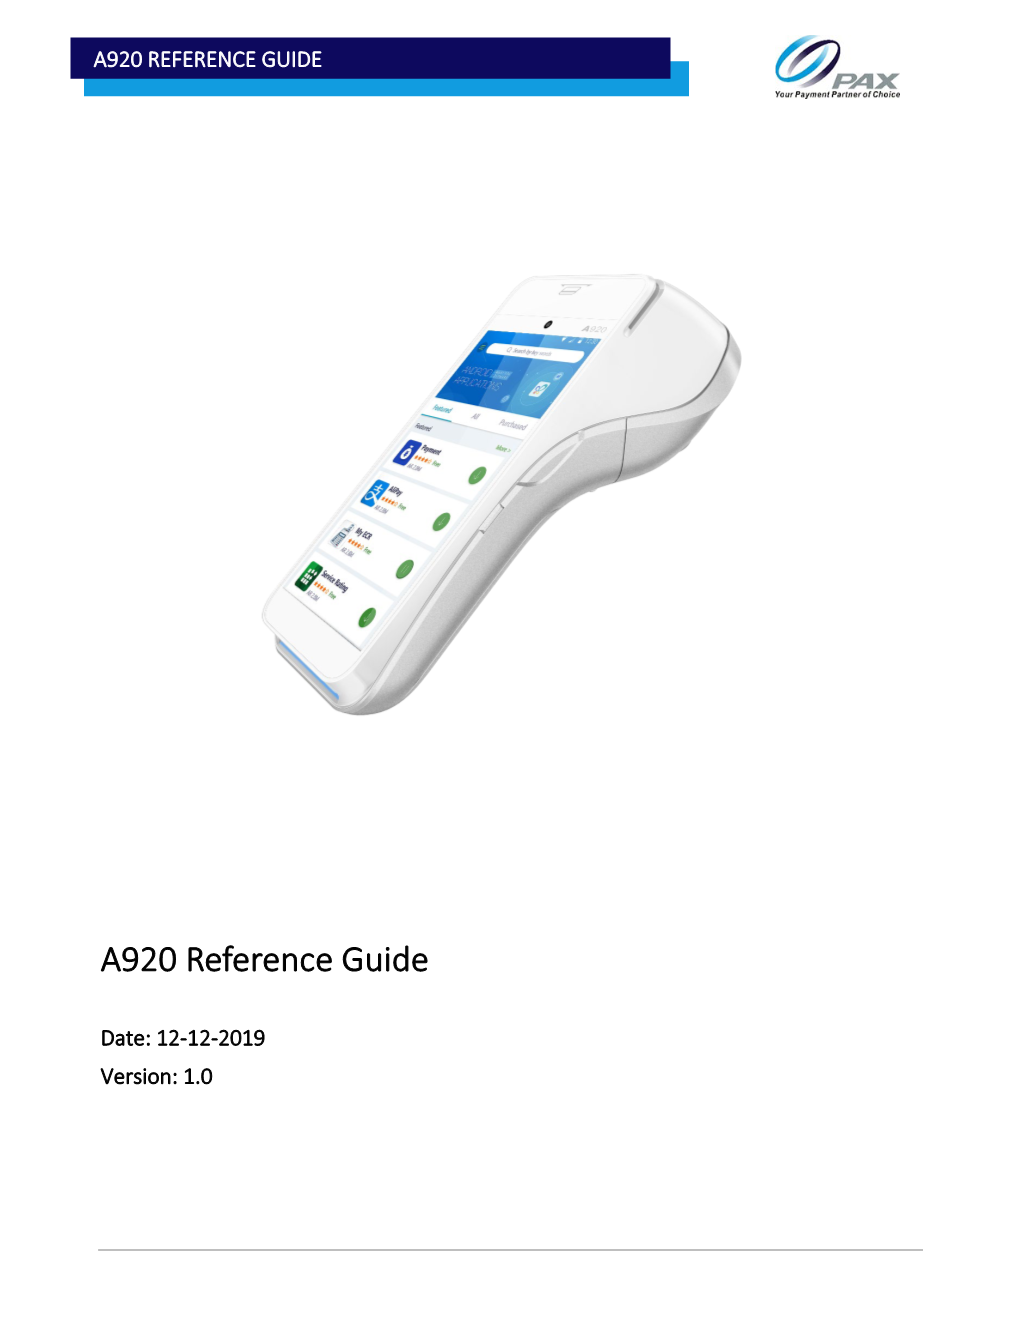 A920 Reference Guide V1.0